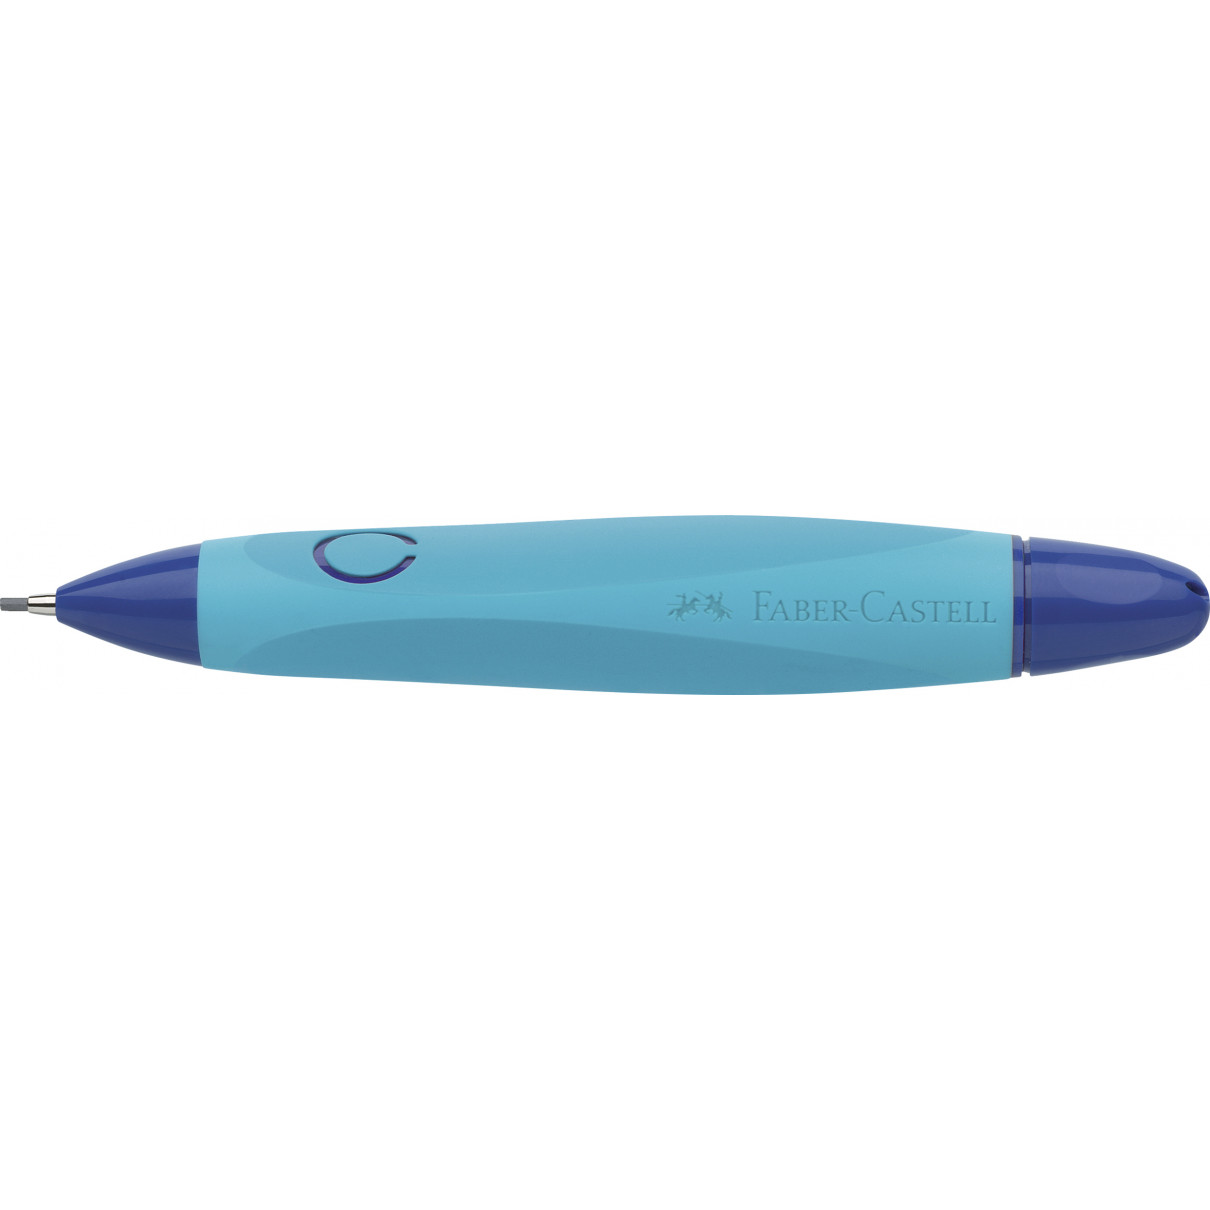 Faber-Castell Scribolino Mechanical Pencil - 1.4mm - Blue